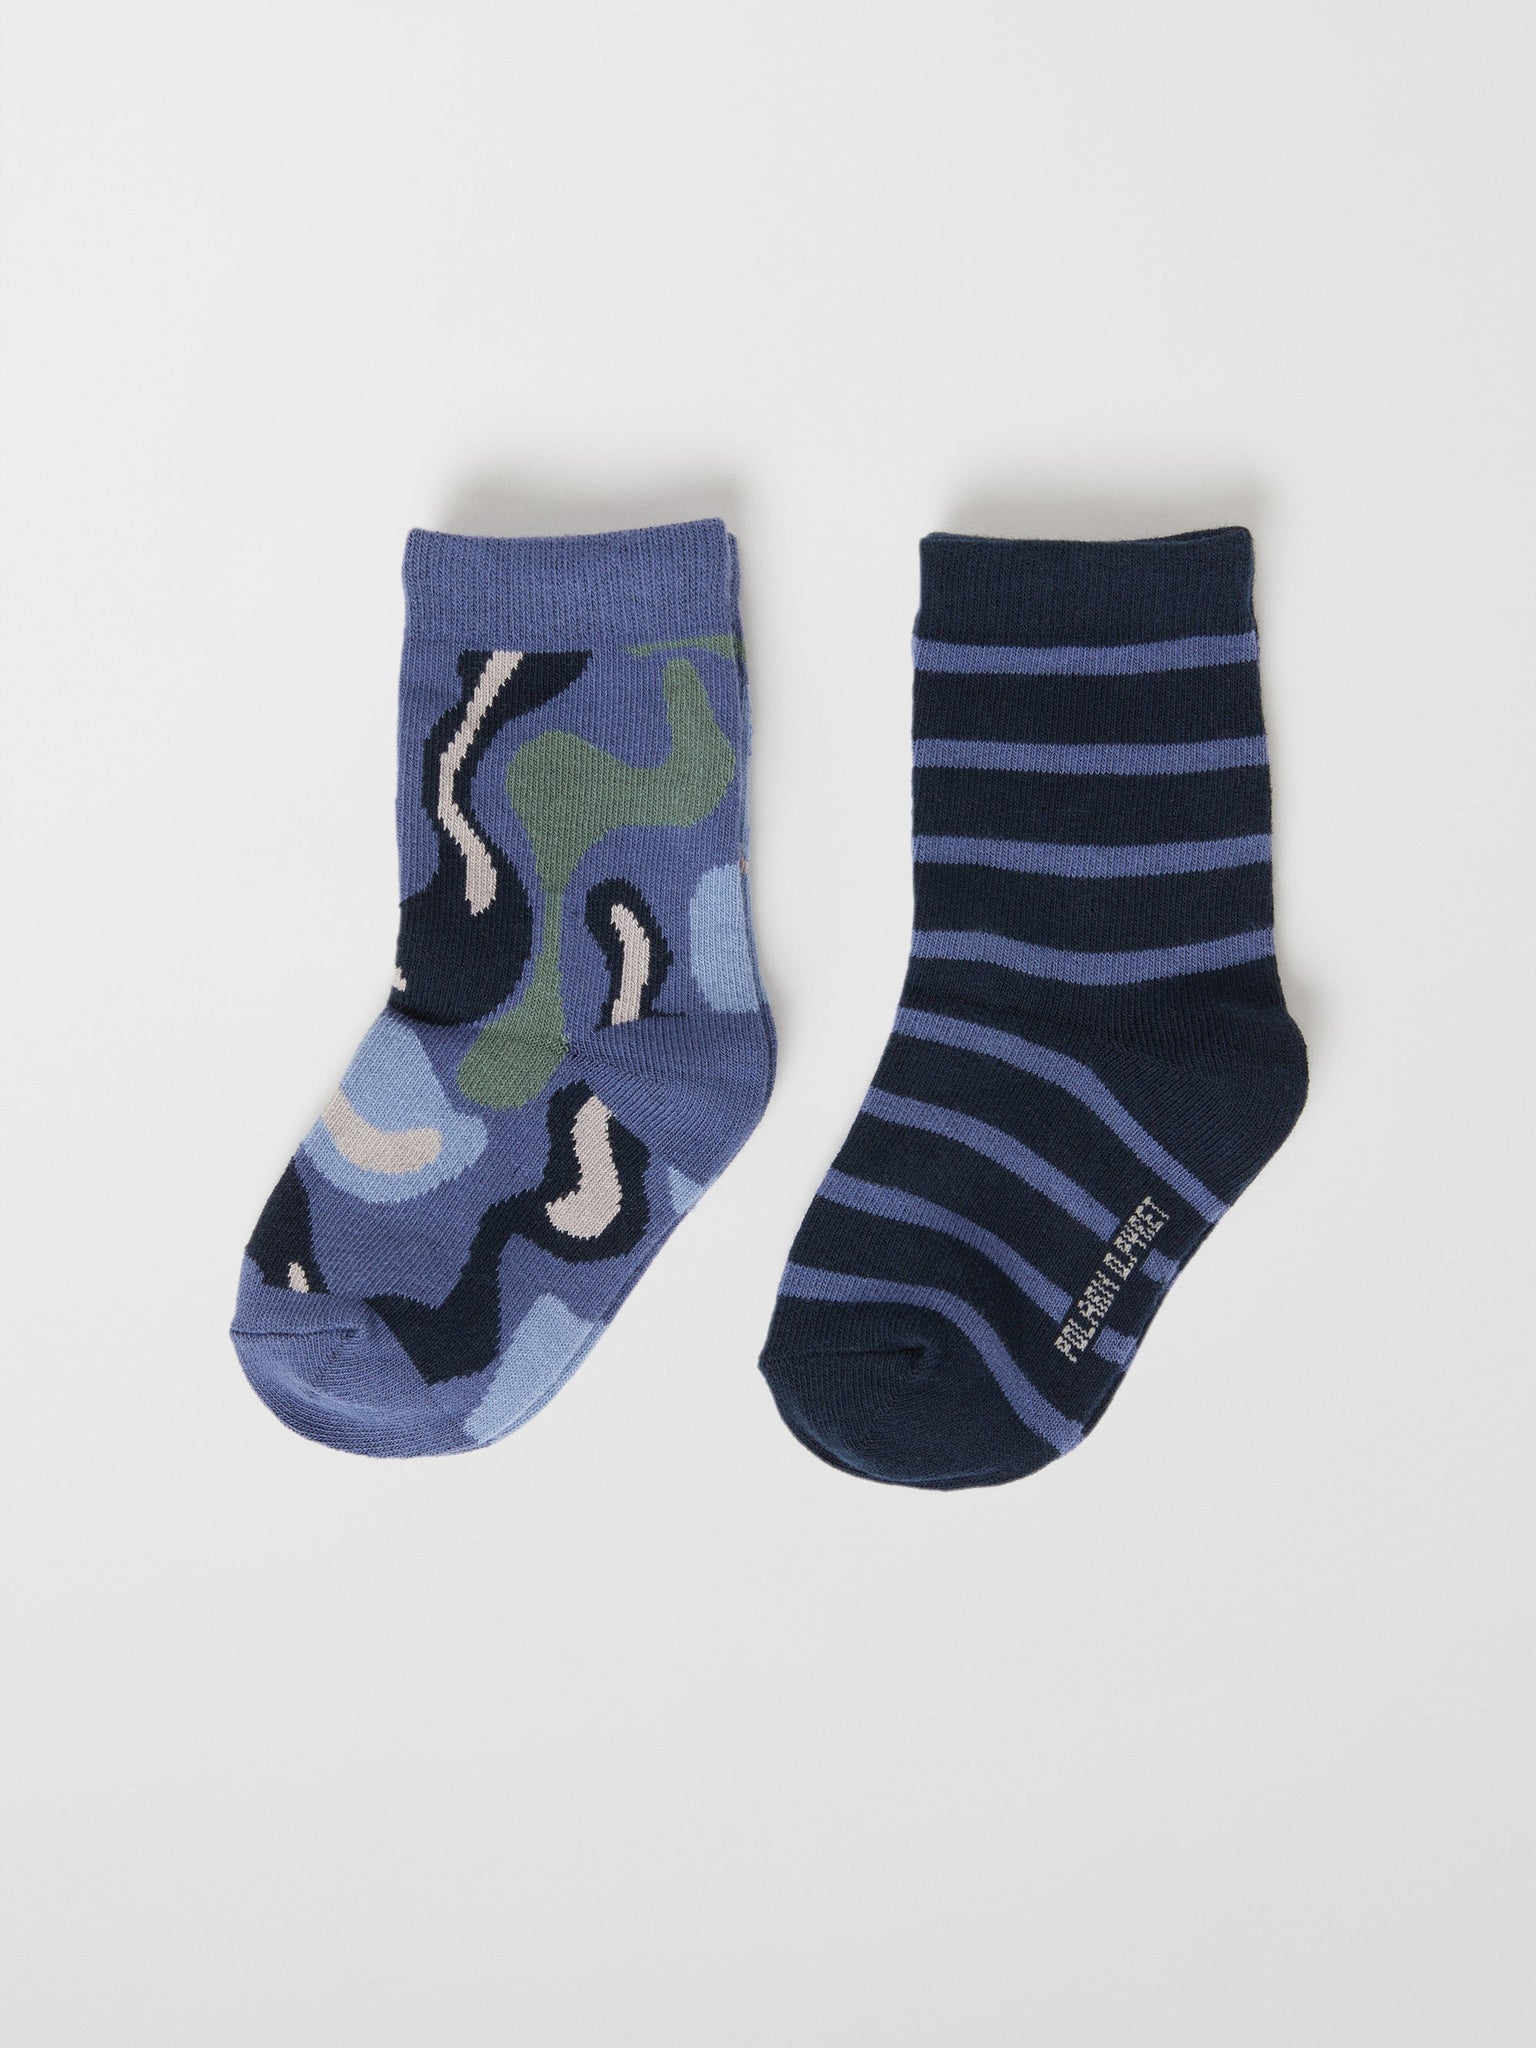 Organic Cotton Kids Socks Multipack from the Polarn O. Pyret kids collection. Ethically produced kids clothing.